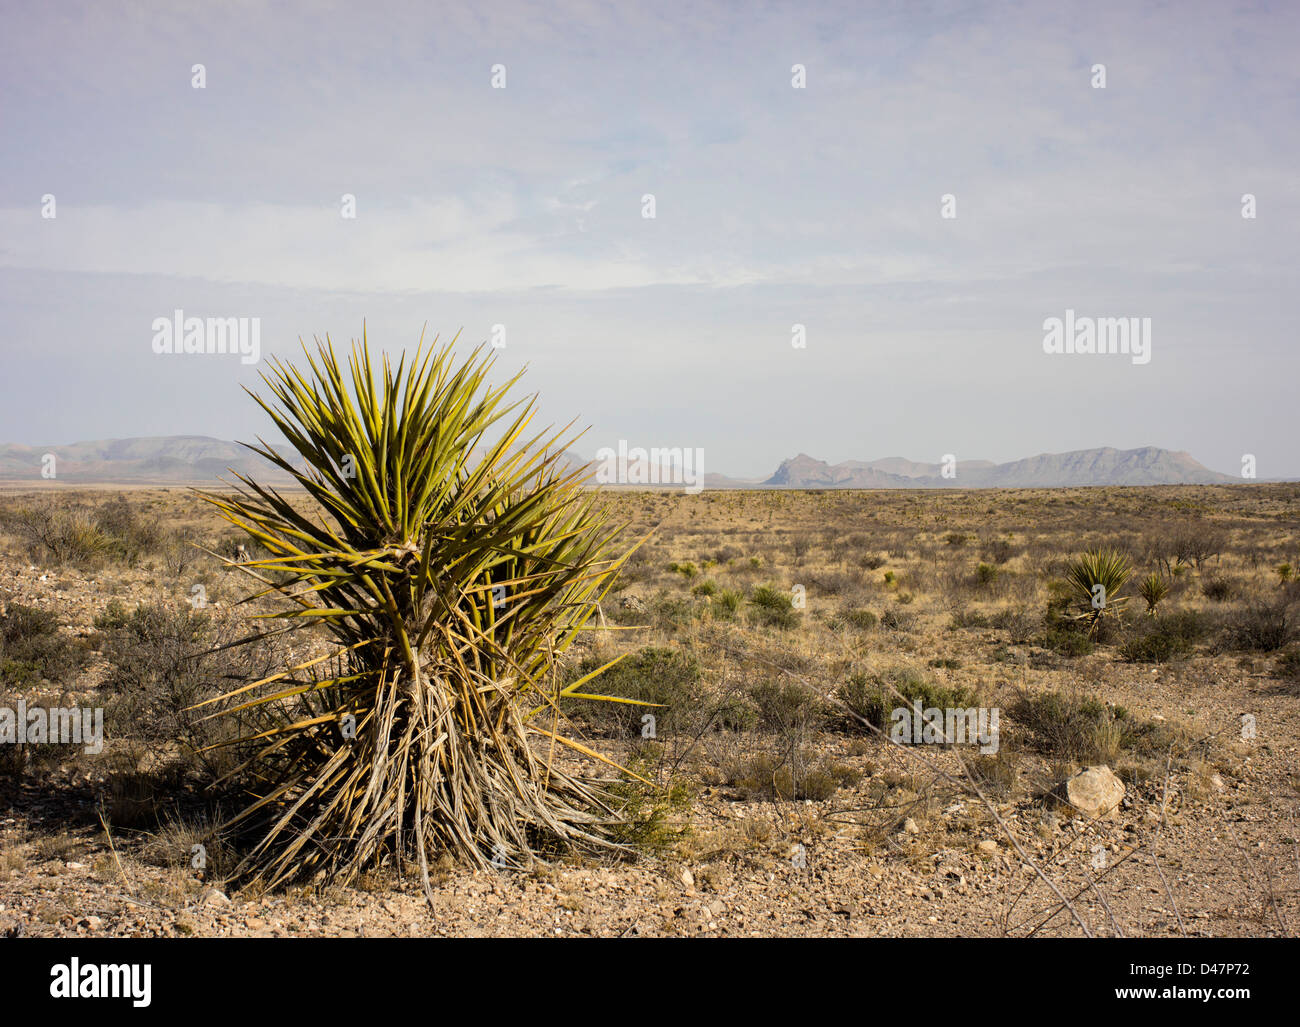 Yucca cactus in the north tip of the Chihuahuan Desert, near Marathon, Texas, with Iron Mountain in the background. Stock Photo